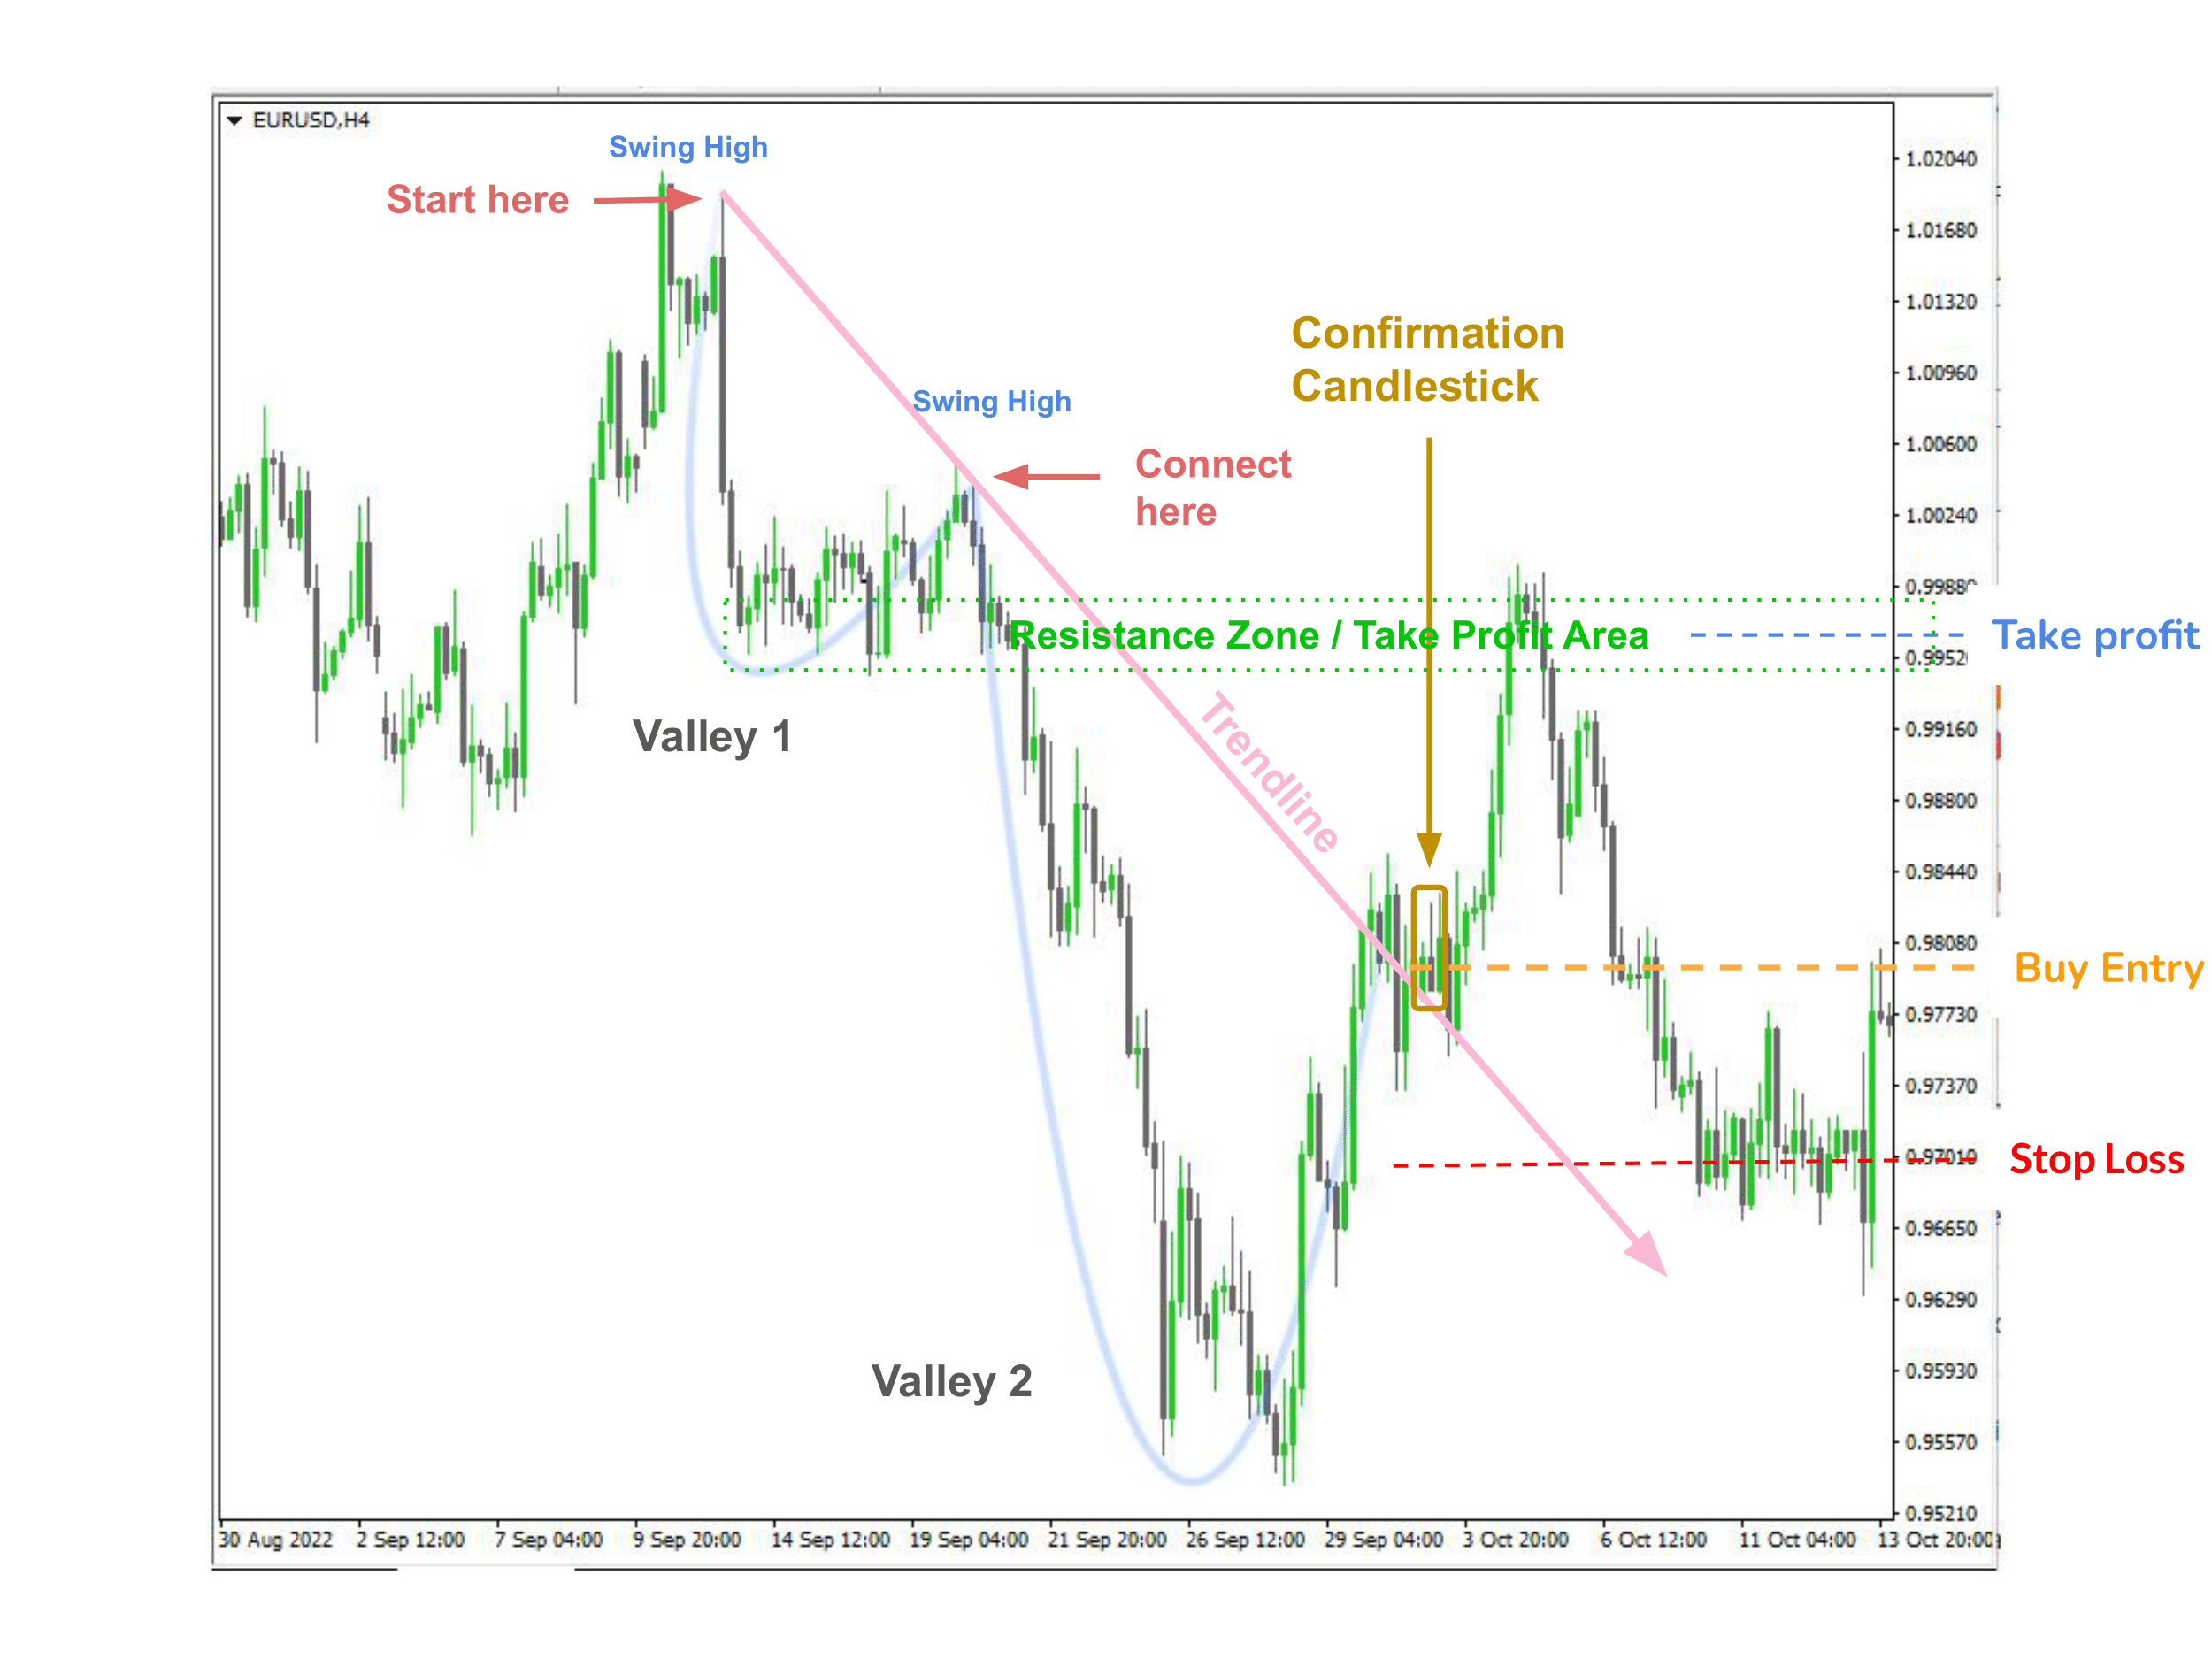 EUR/USD breakout buy setup for our trading strategy with entry price, stop loss, and take profit levels.